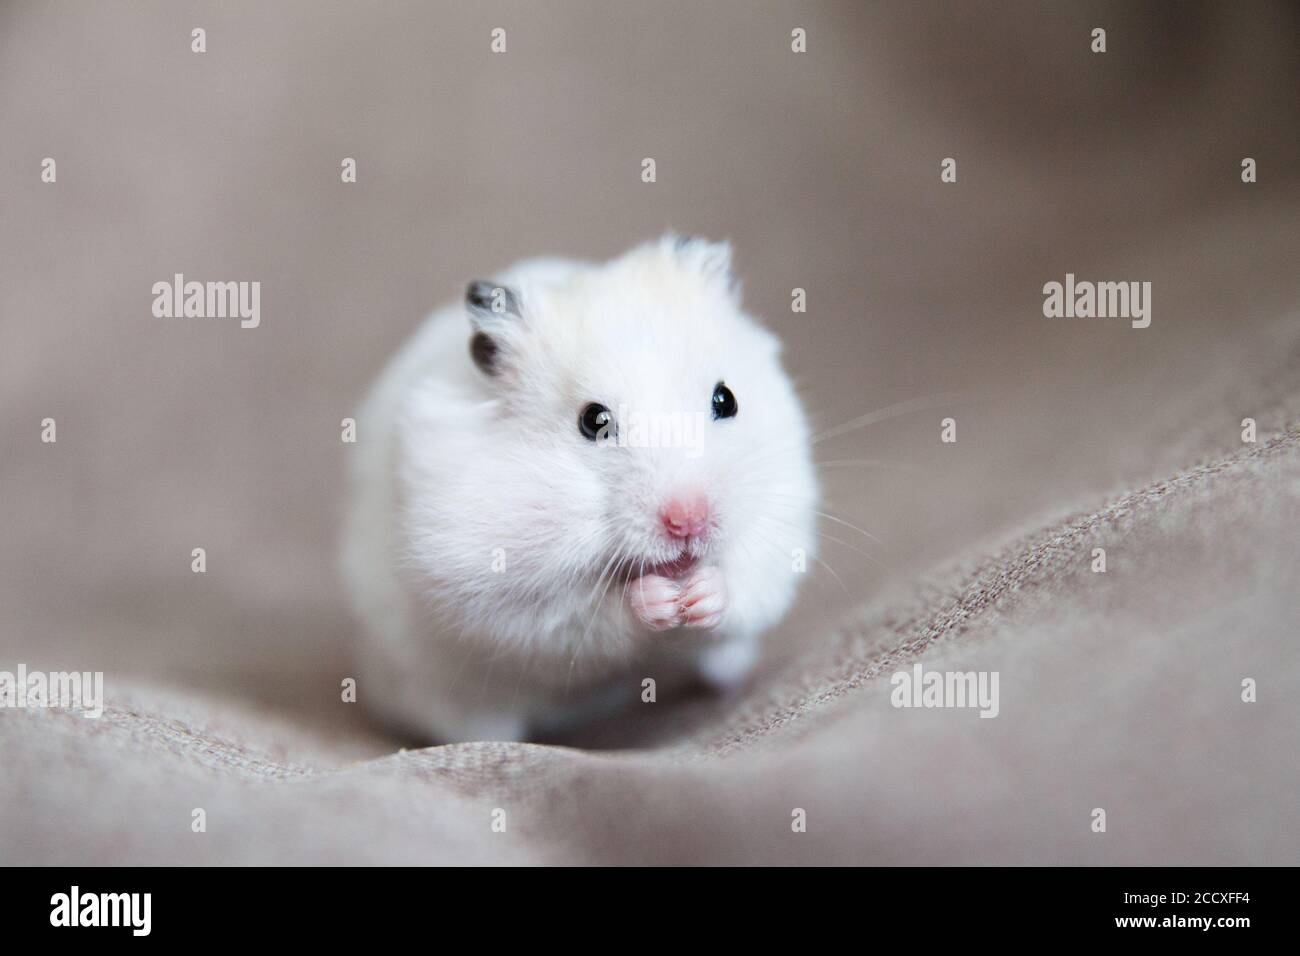 White hamster with pink paws and black eyes. Hamster pet Stock Photo